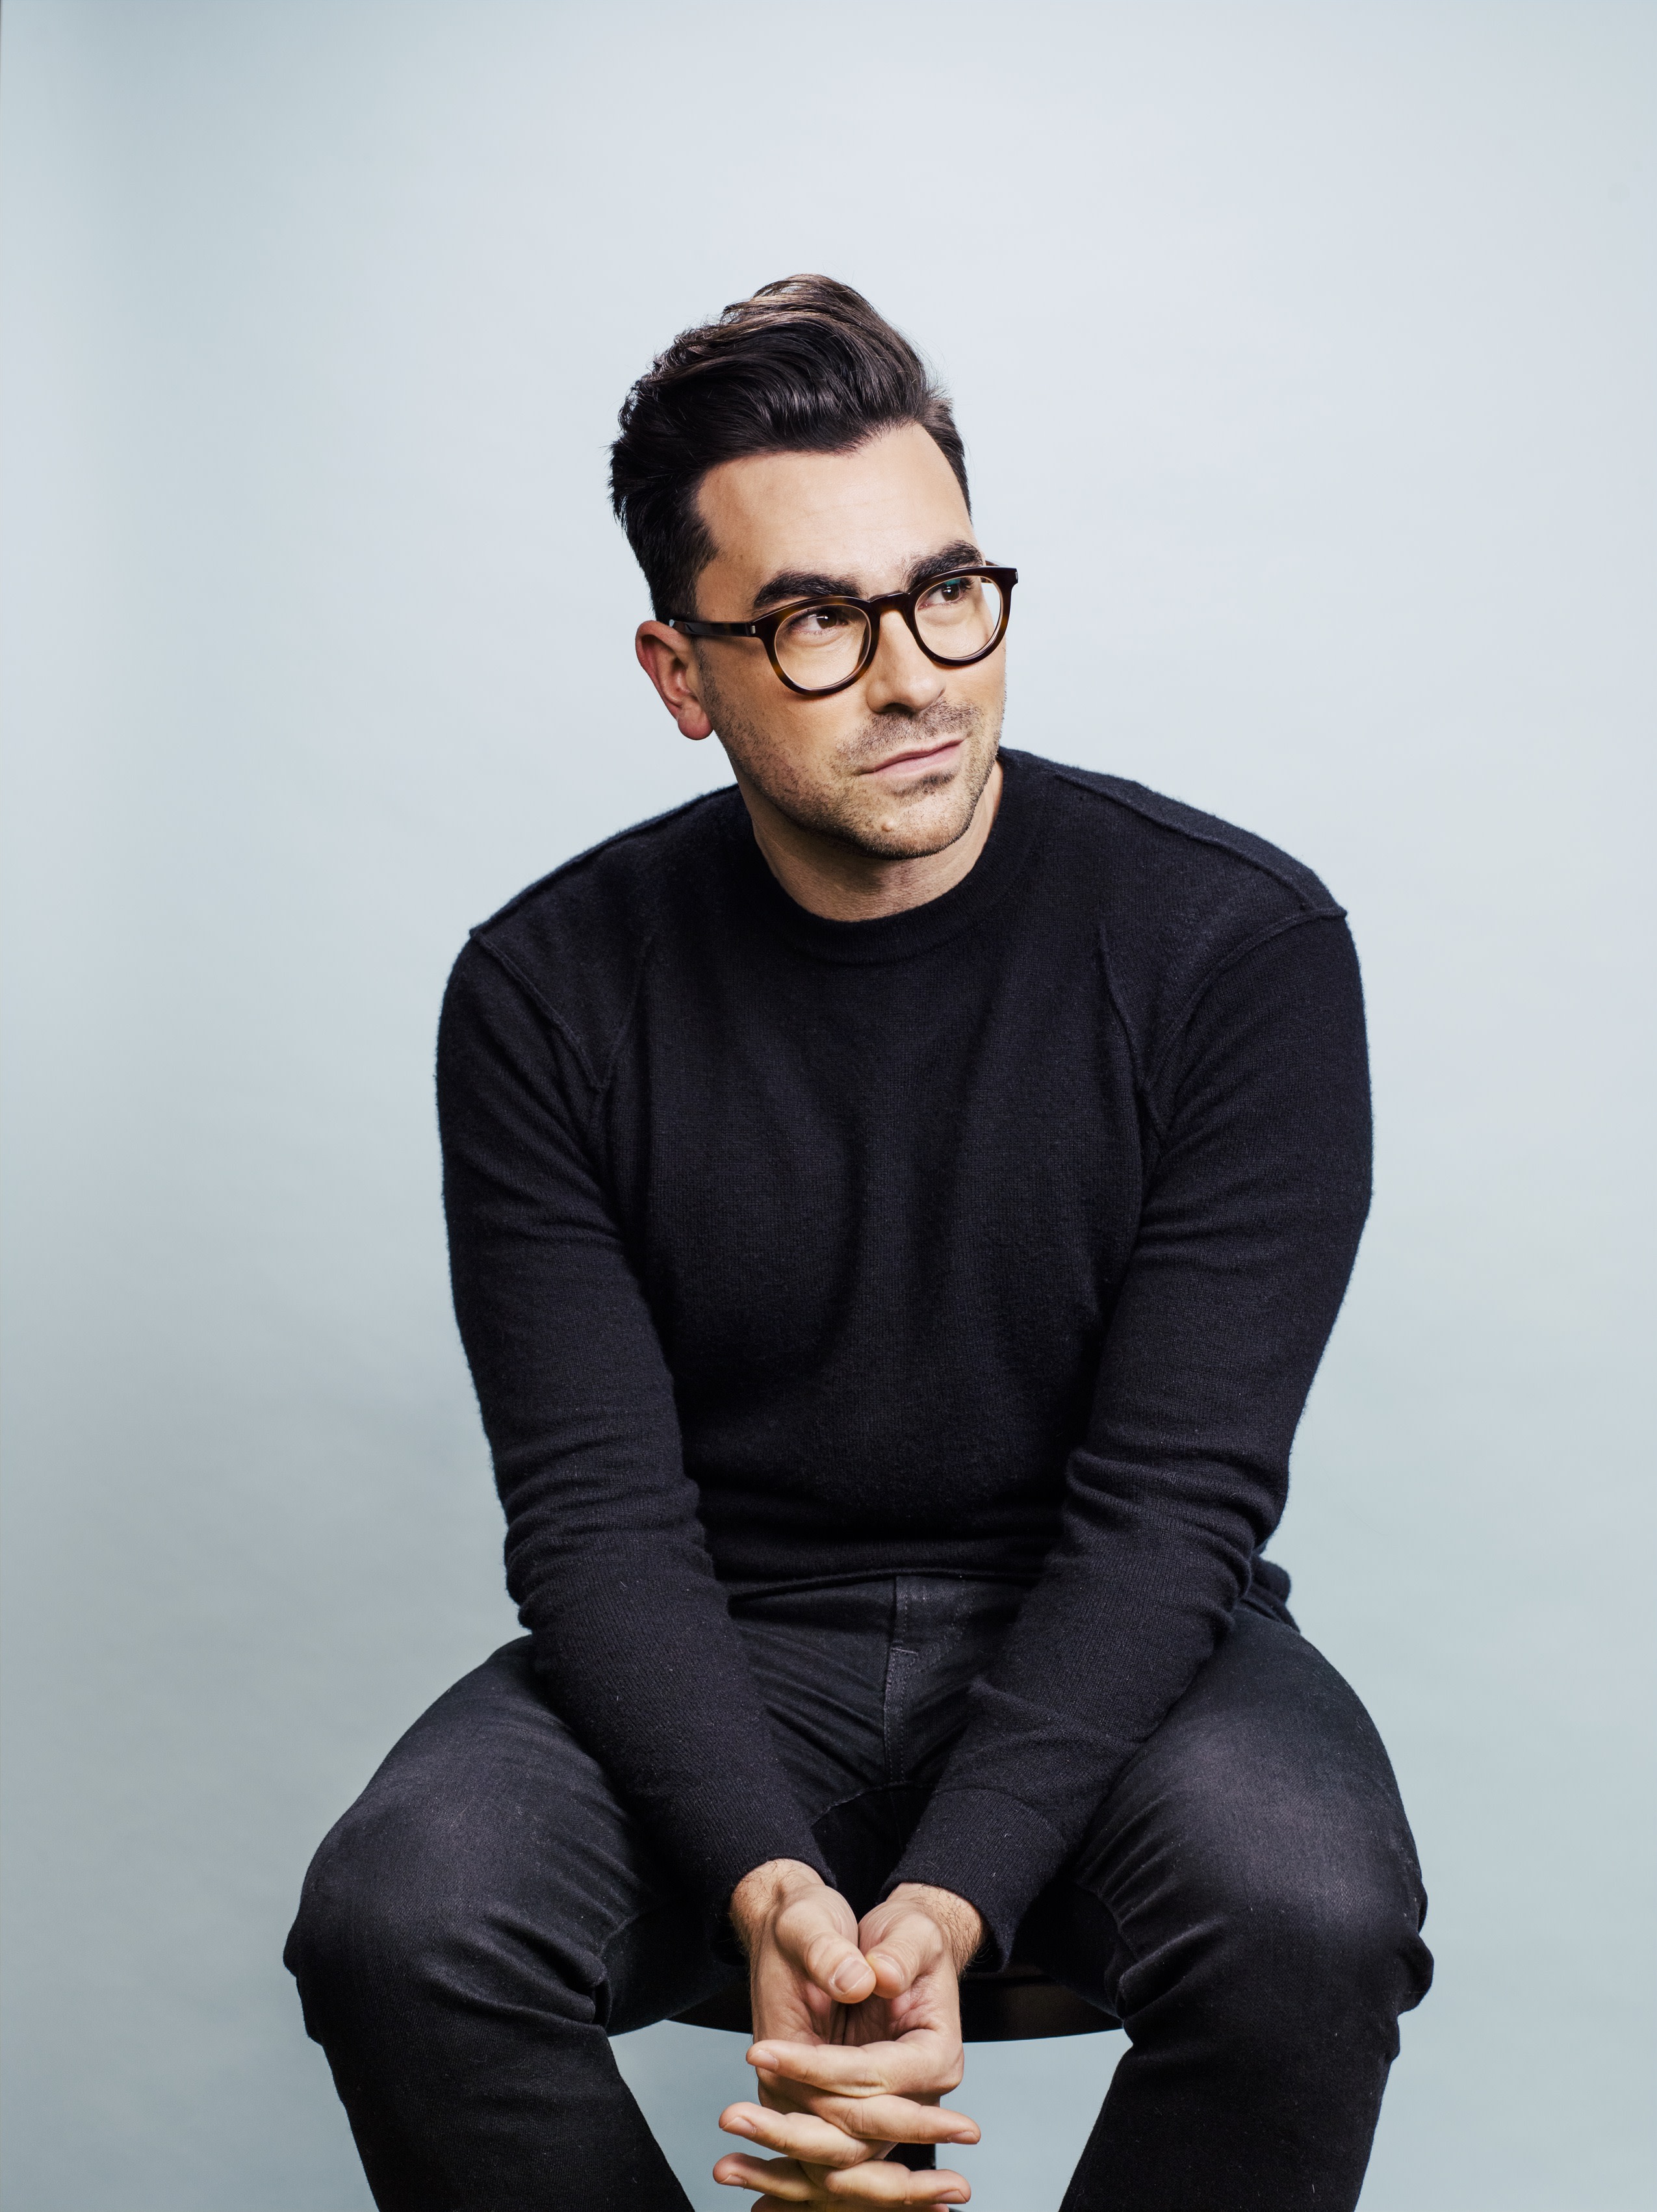 Emmy Award Winning Writer/Producer Dan Levy Partners With Netflix To Create  New Original Content Across Film And TV - About Netflix